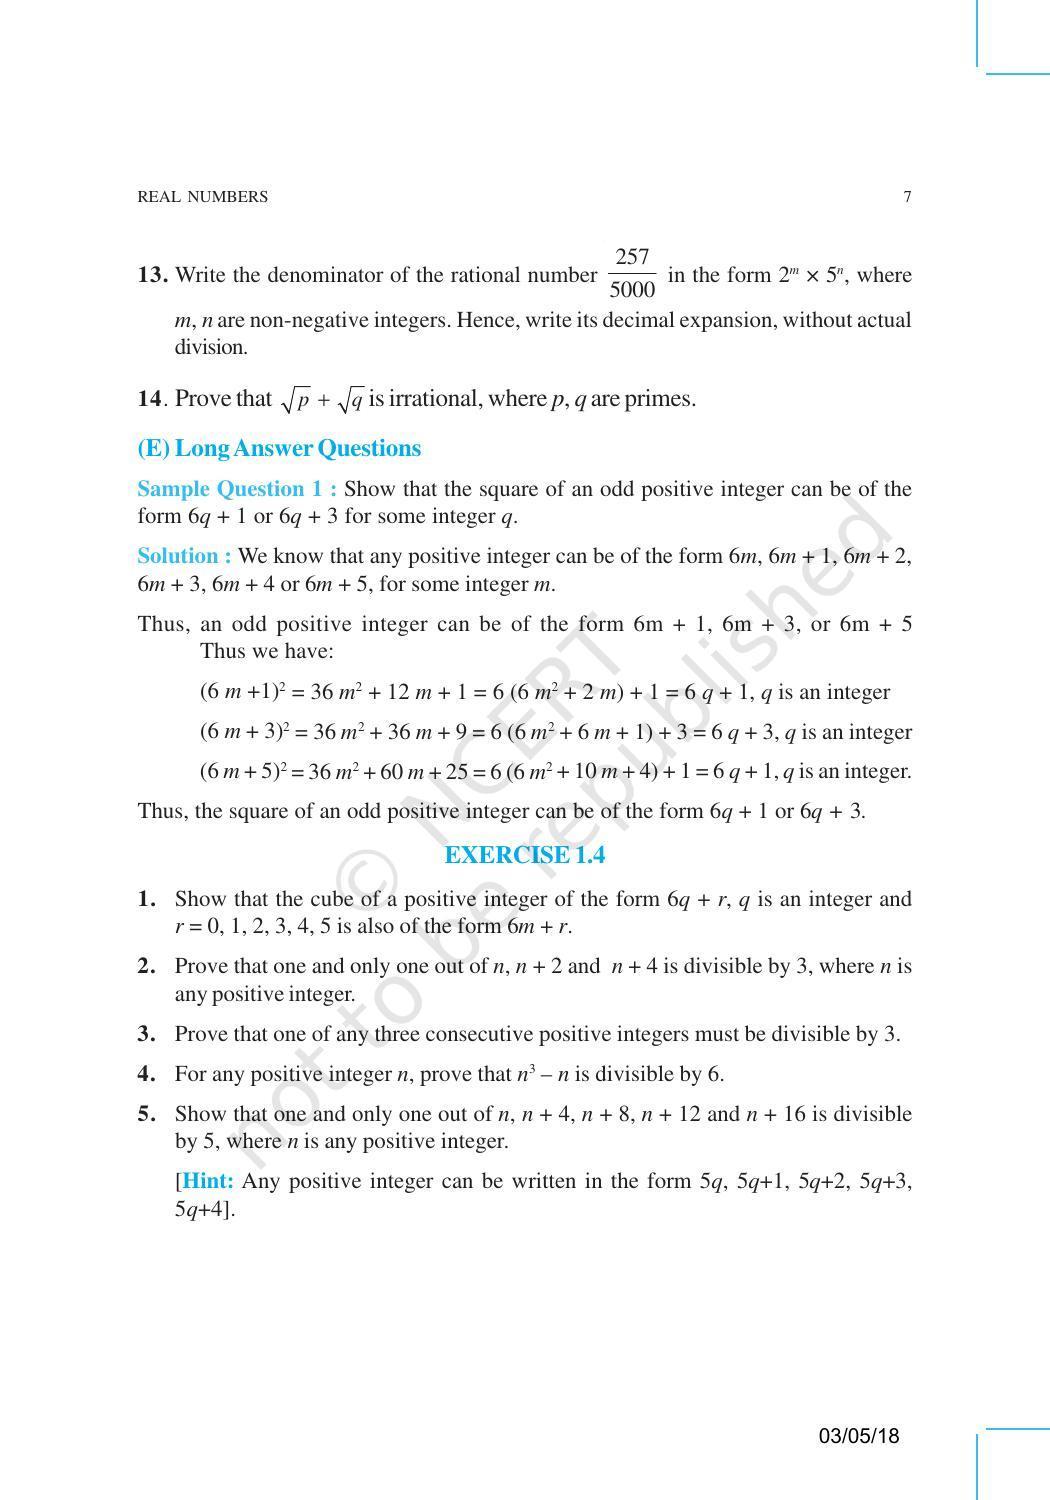 NCERT Exemplar Book for Class 10 Maths: Chapter 1 Real Numbers - Page 7